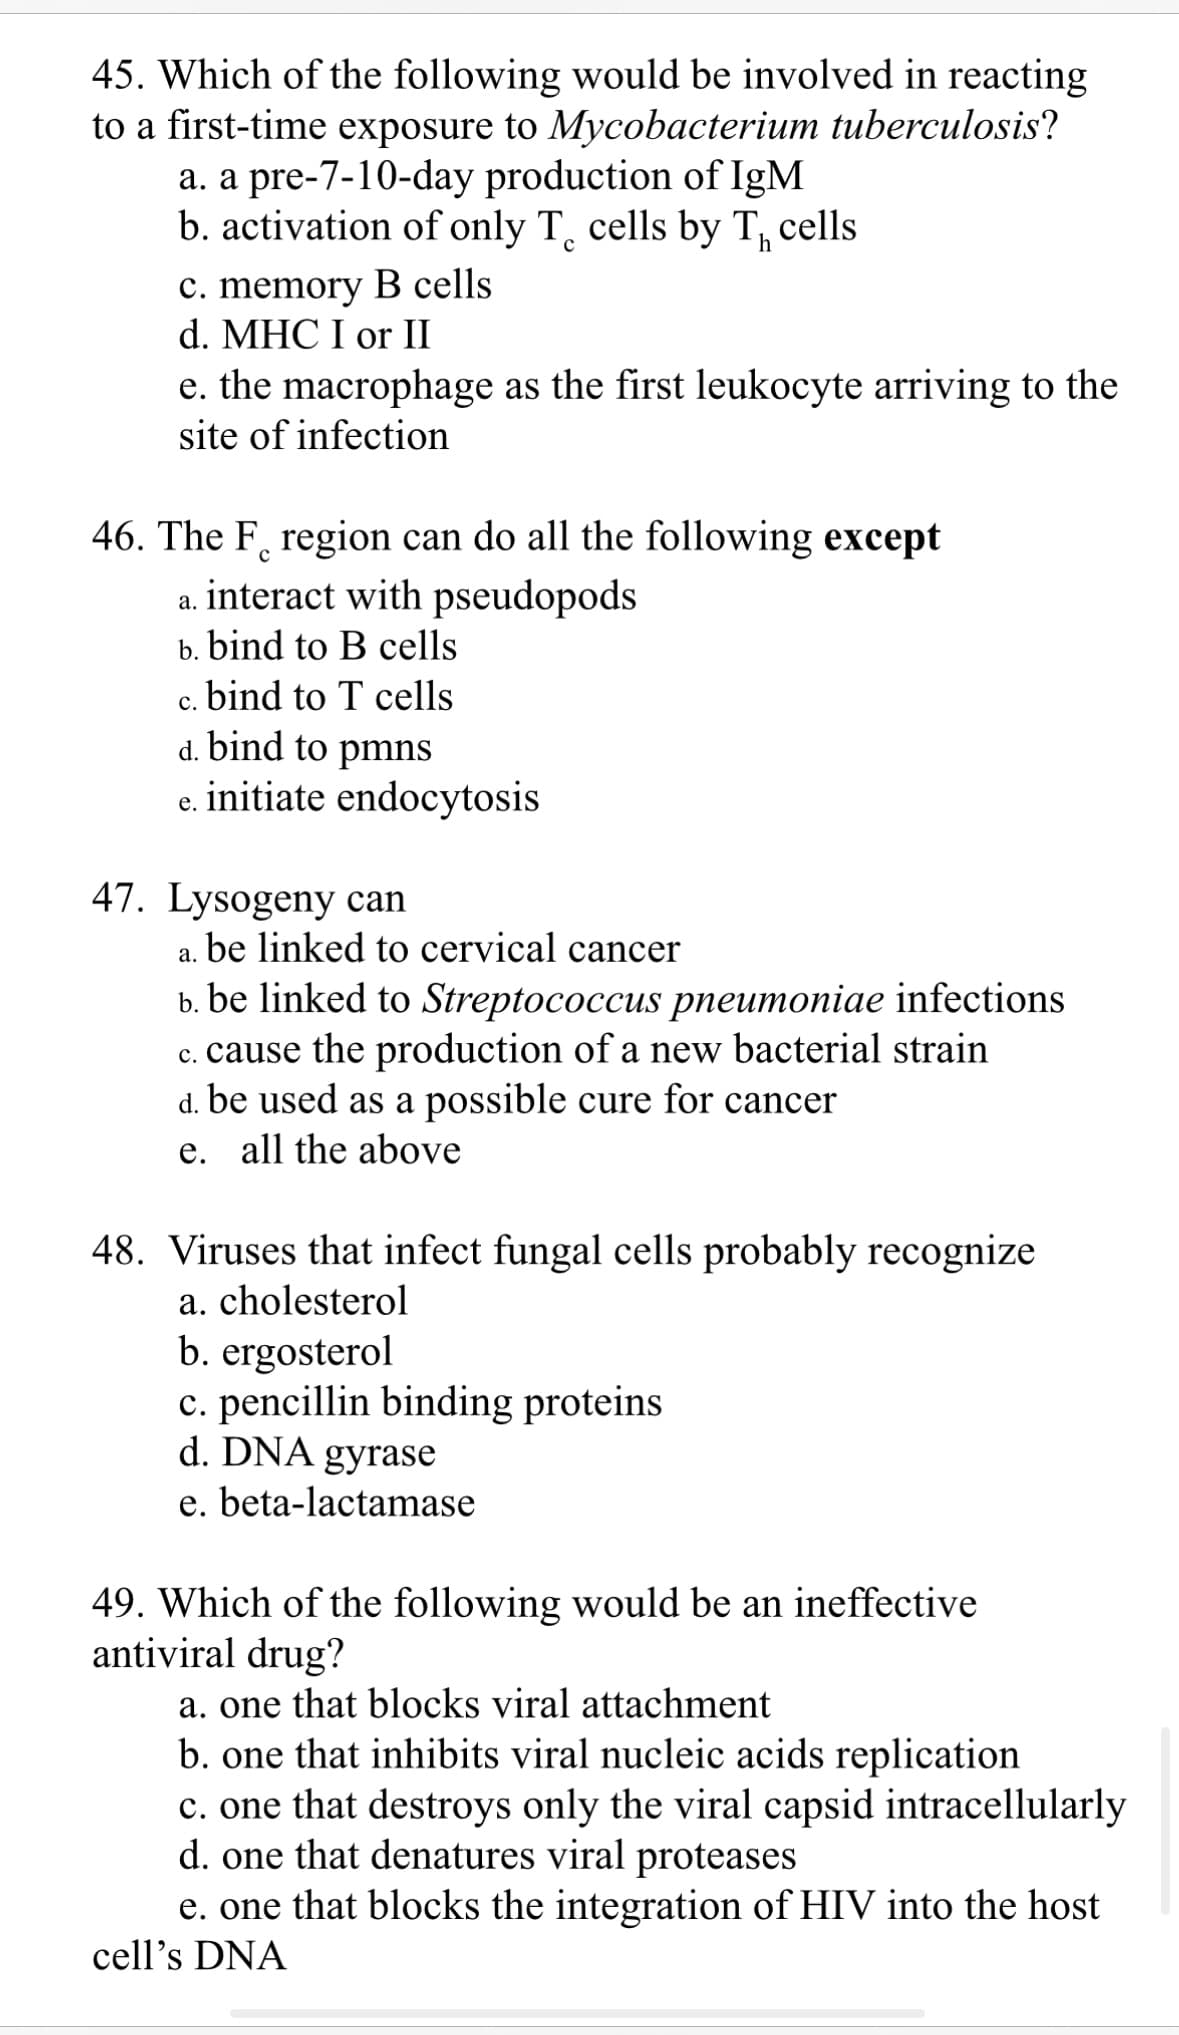 45. Which of the following would be involved in reacting
to a first-time exposure to Mycobacterium tuberculosis?
a. a pre-7-10-day production of IgM
b. activation of only T cells by T cells
с
c. memory B cells
d. MHC I or II
e. the macrophage as the first leukocyte arriving to the
site of infection
46. The F region can do all the following except
a. interact with pseudopods
b. bind to B cells
c. bind to T cells
d. bind to pmns
initiate endocytosis
e.
47. Lysogeny can
be linked to cervical cancer
a.
b. be linked to Streptococcus pneumoniae infections
c. cause the production of a new bacterial strain
d. be used as a possible cure for cancer
e. all the above
48. Viruses that infect fungal cells probably recognize
a. cholesterol
b. ergosterol
c. pencillin binding proteins
d. DNA gyrase
e. beta-lactamase
49. Which of the following would be an ineffective
antiviral drug?
a. one that blocks viral attachment
b. one that inhibits viral nucleic acids replication
c. one that destroys only the viral capsid intracellularly
d. one that denatures viral proteases
e. one that blocks the integration of HIV into the host
cell's DNA